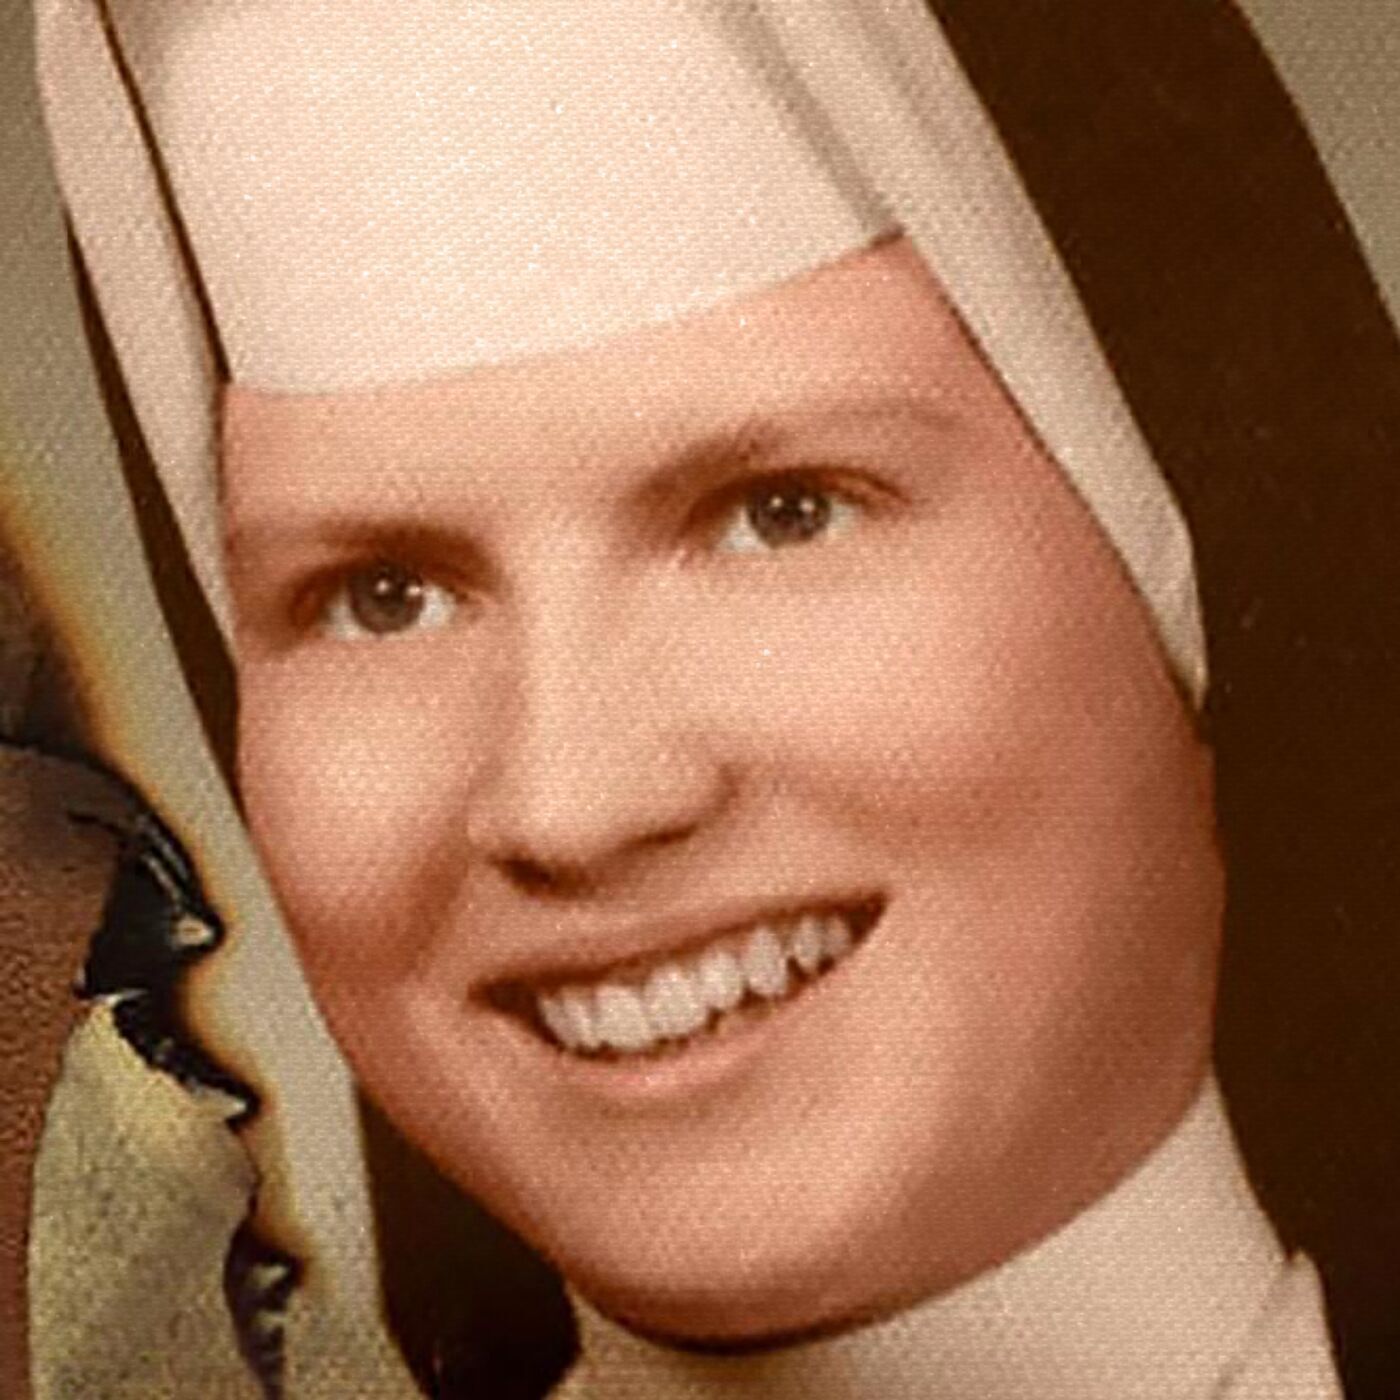 S2 Ep51: Sister Cathy, Tom Nugent - A Journalist’s Quest, Part 2